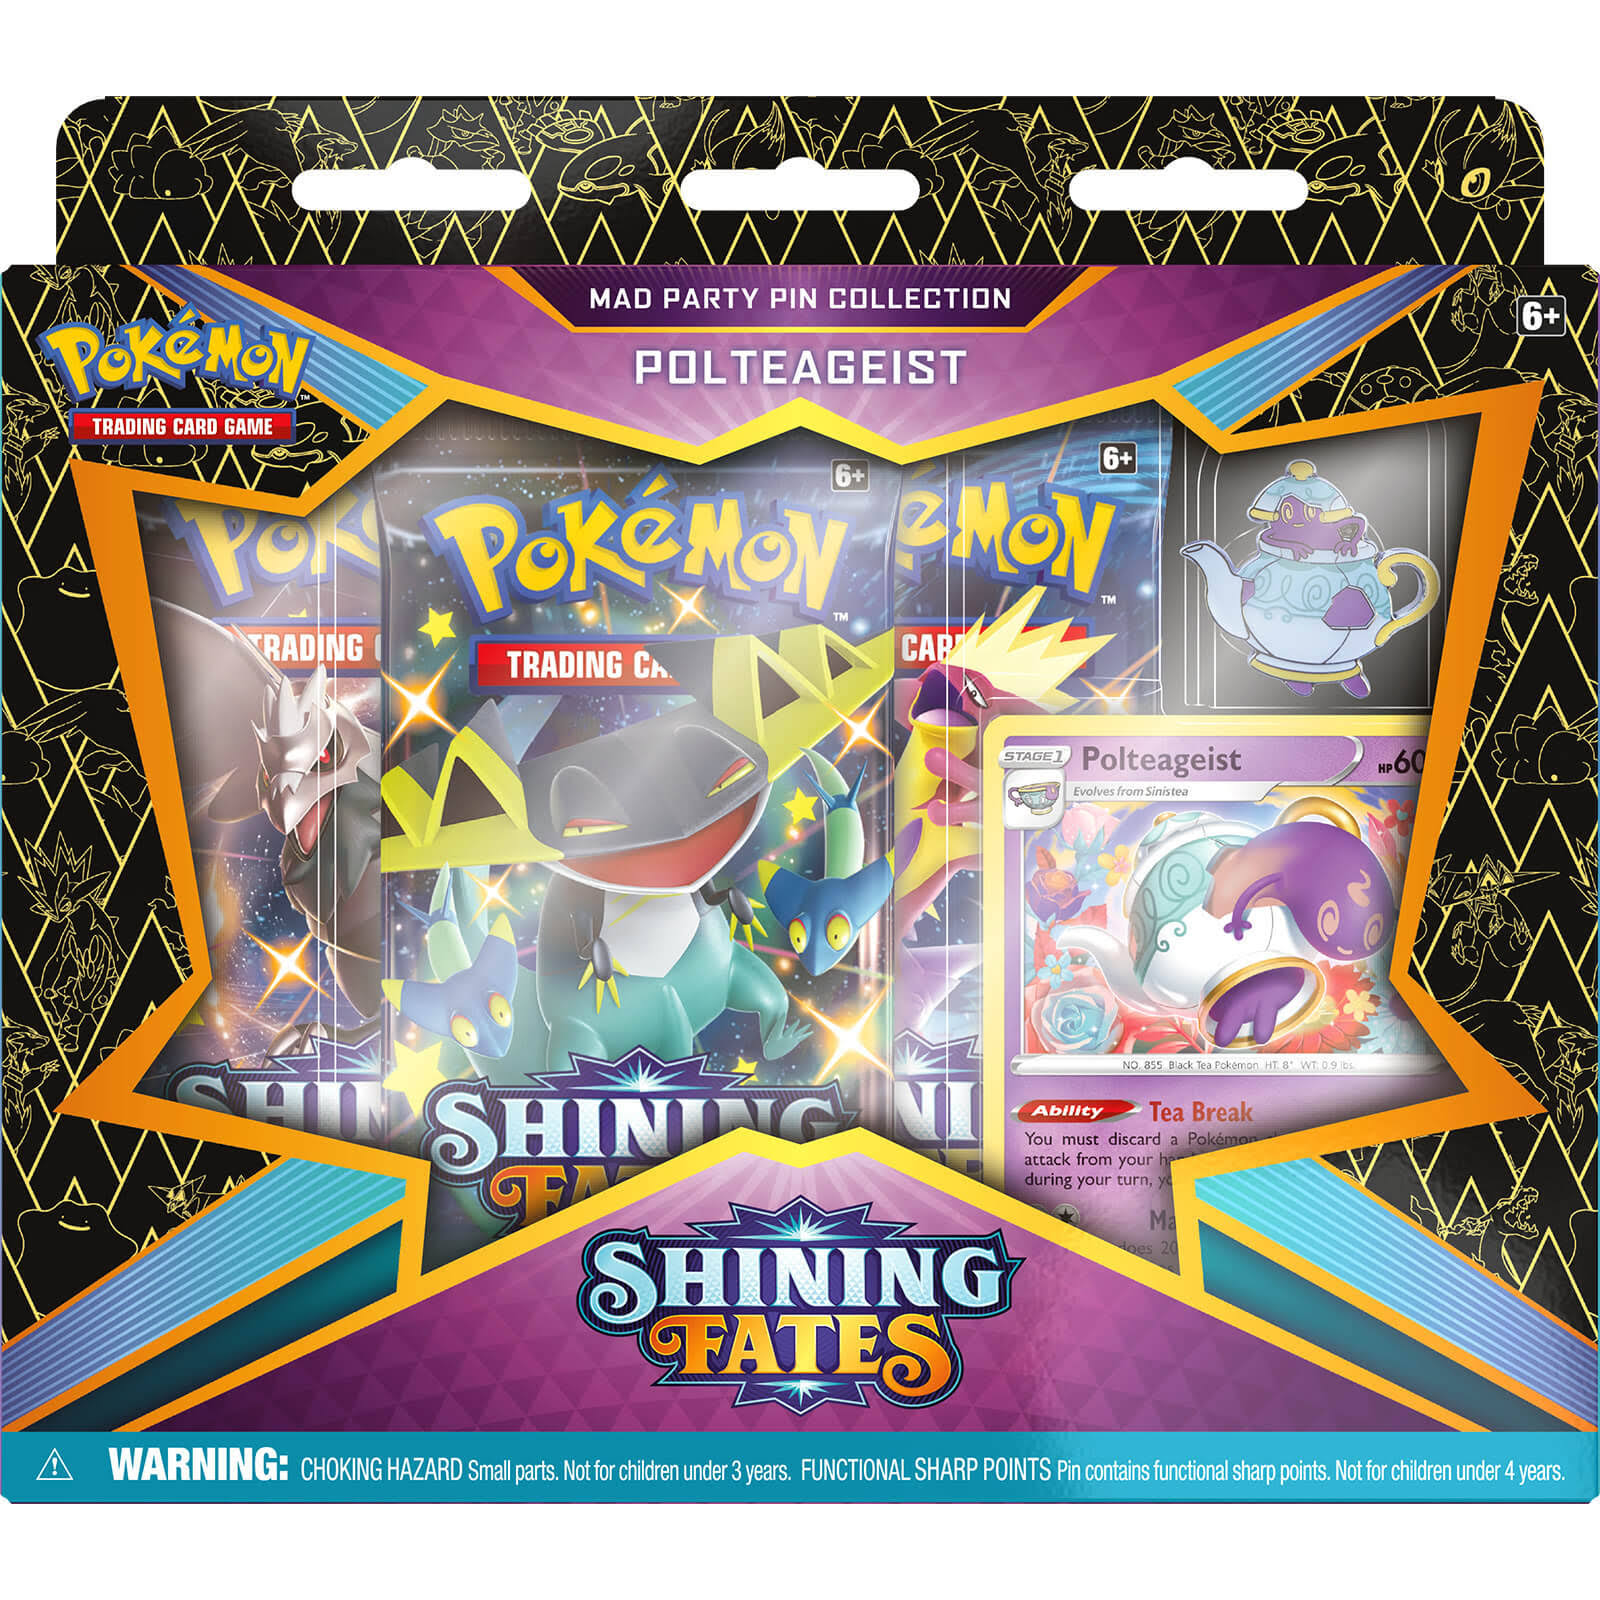 Pokemon TCG: Shining Fates Mad Party Pin Collection (Assortment)